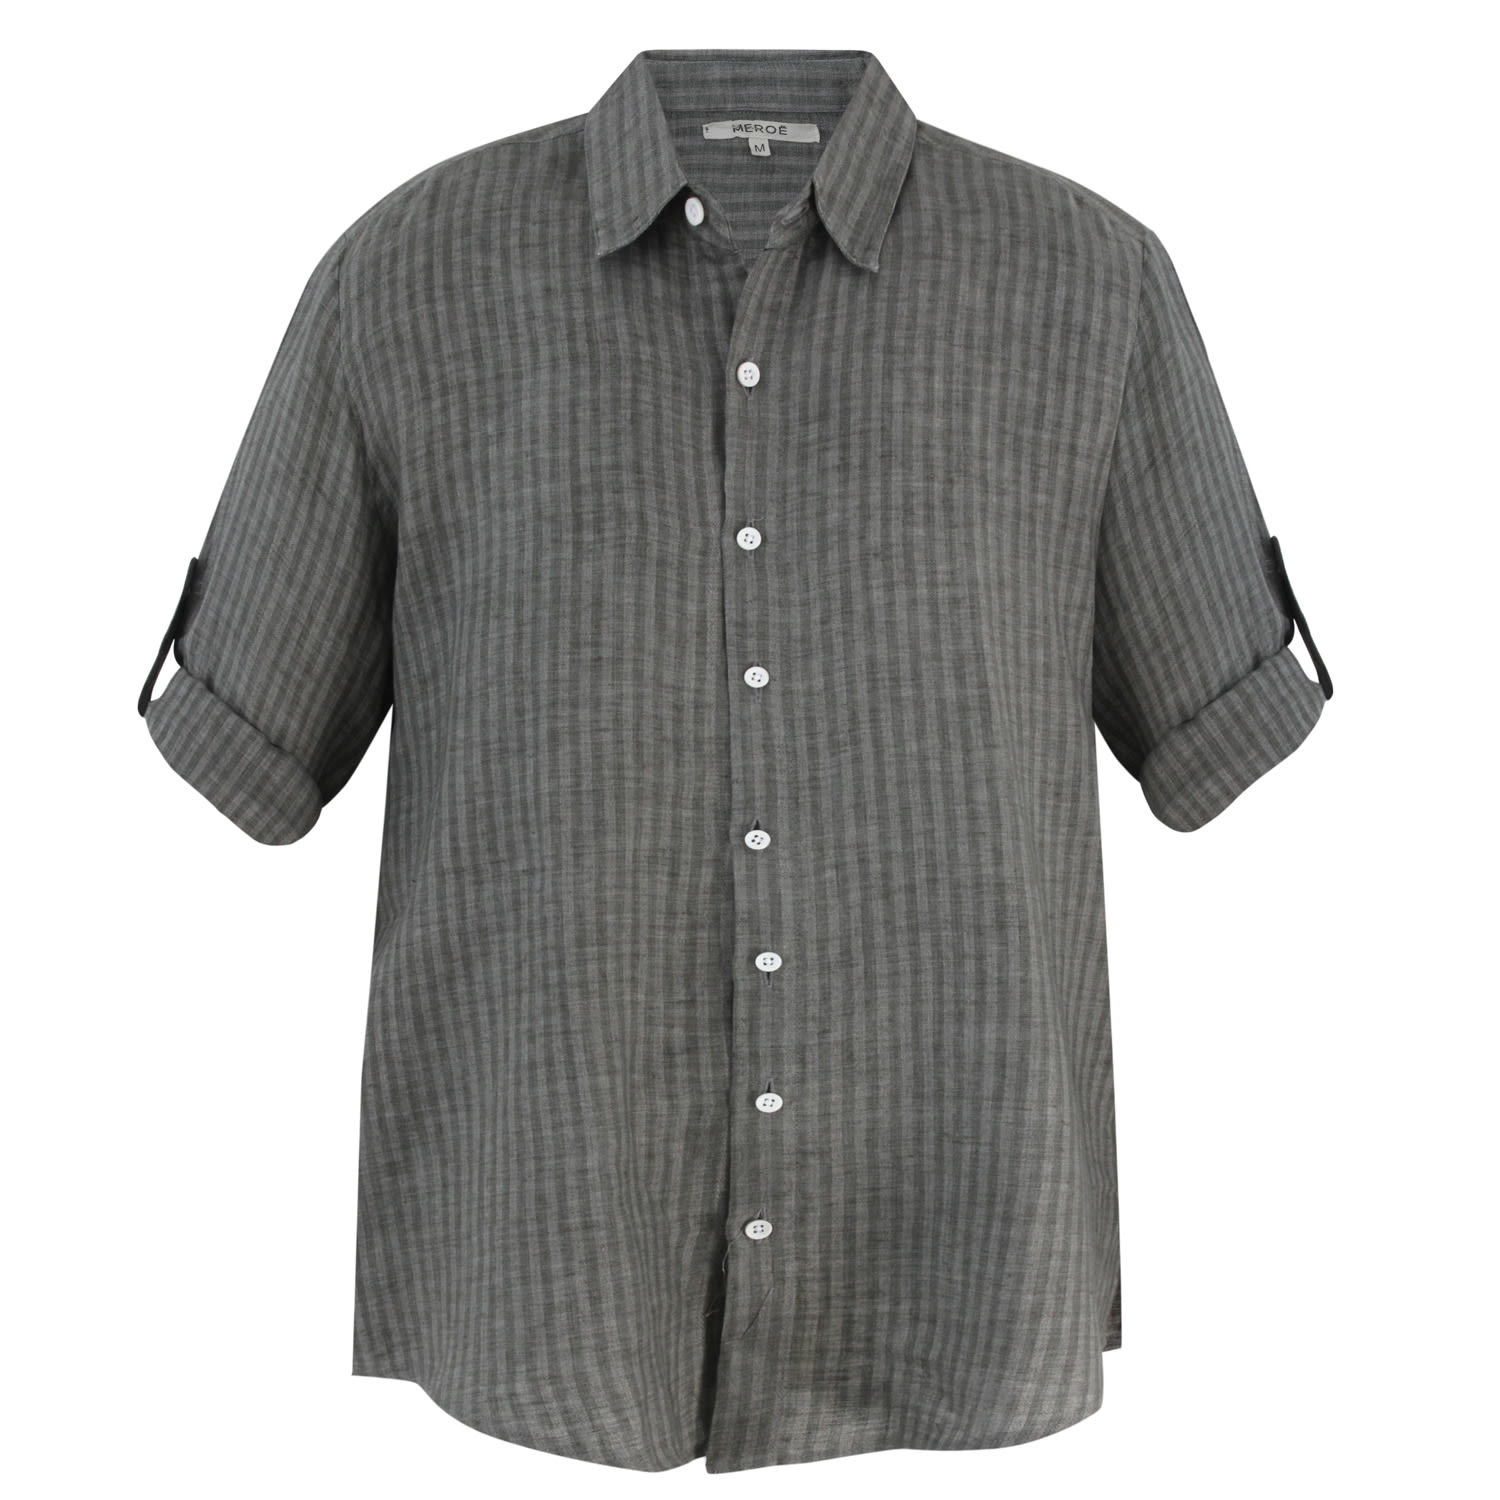 Men's Green Relaxed Long Sleeves Shirt Gray & Olive Stripes Small MEROË